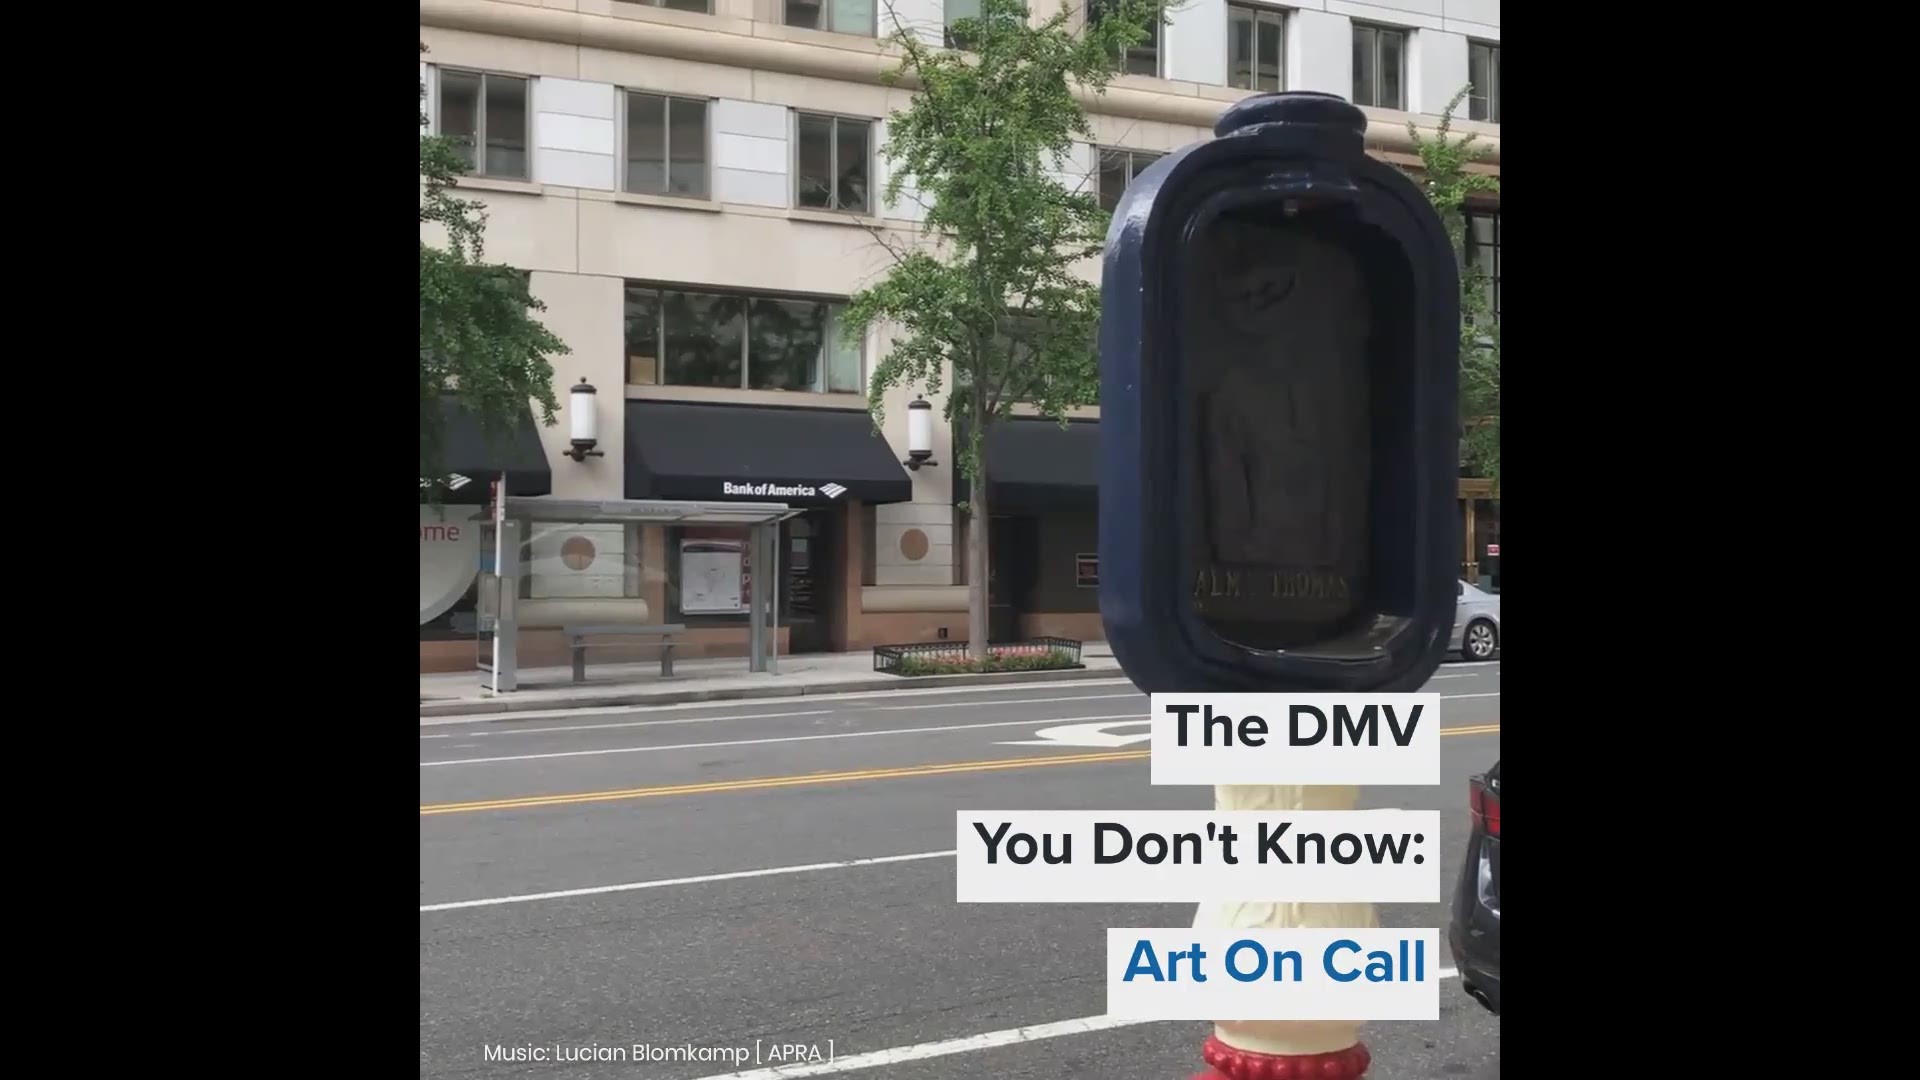 This the DMV You Don't Know